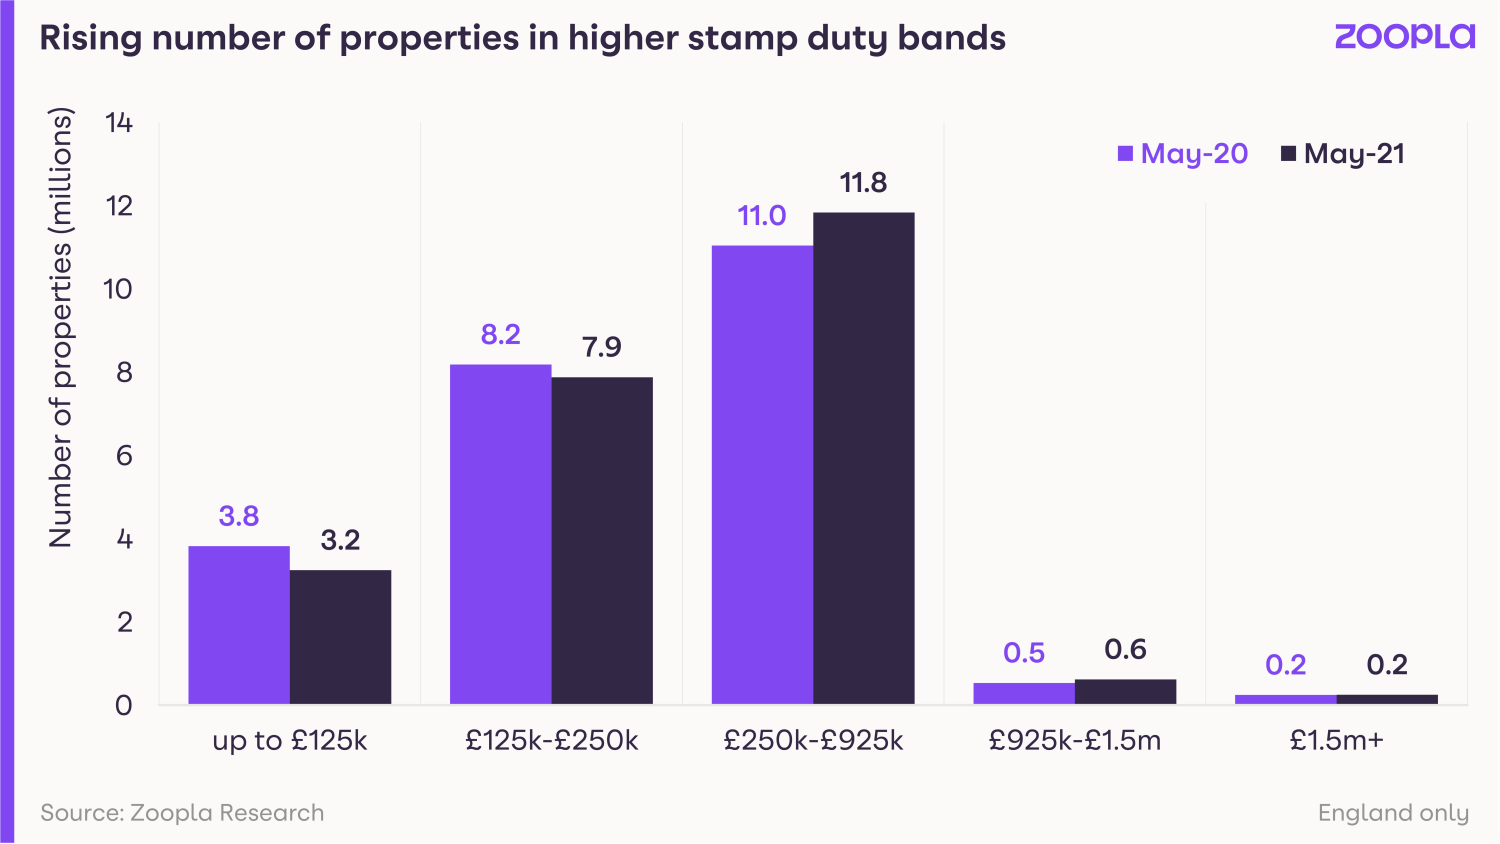 Graph showing the rising number of properties in higher stamp duty bands